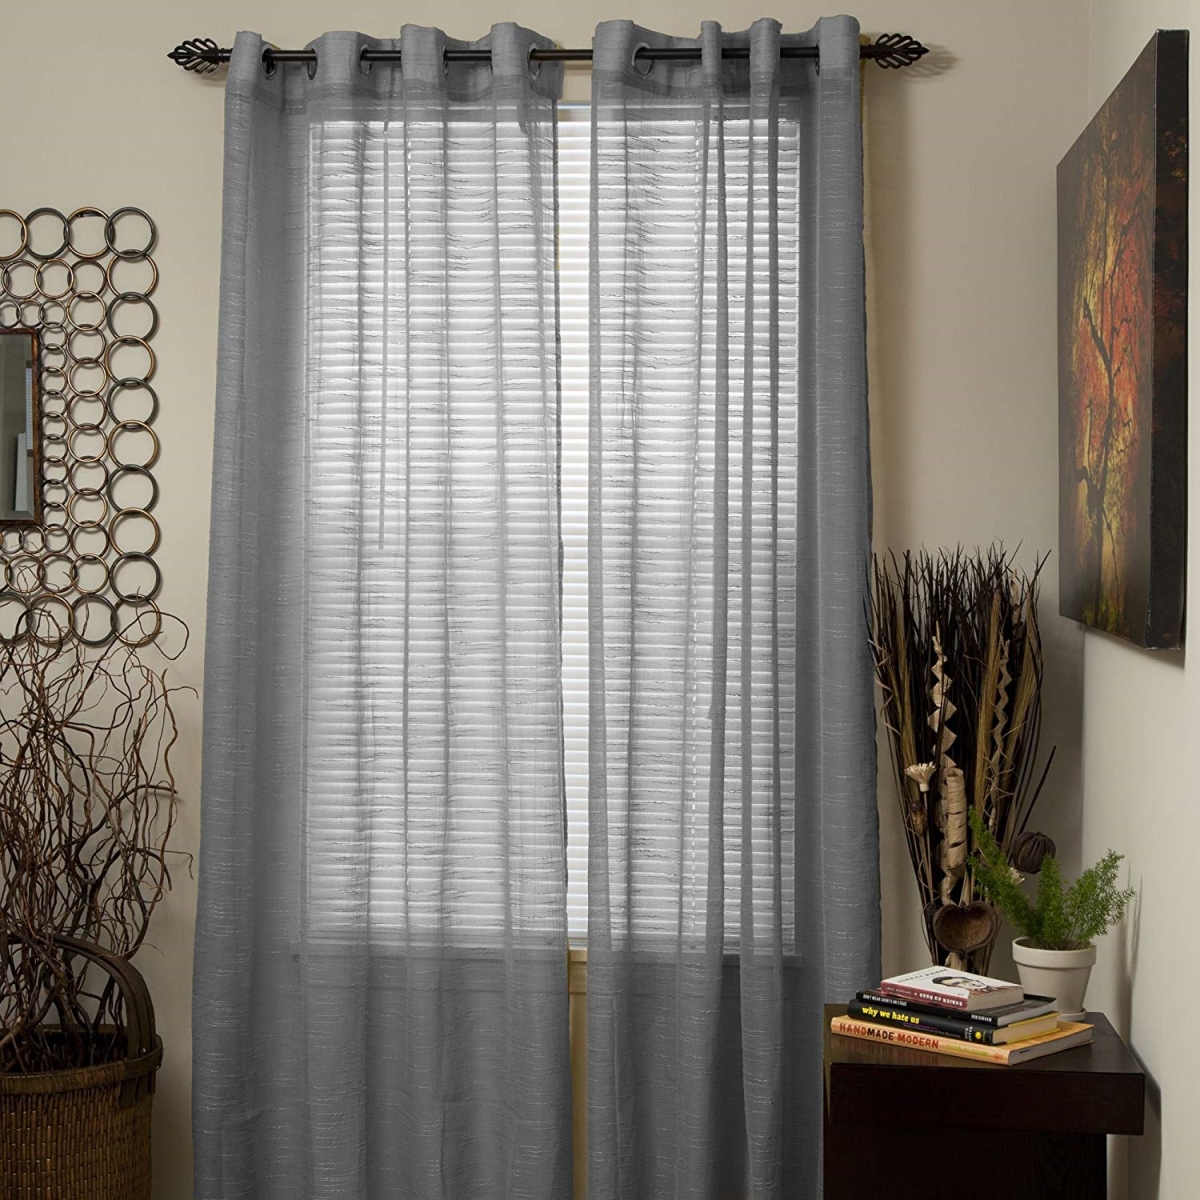 63a-43146 Mia Jacquard Grommet Single Curtain Panel, Grey - 95 In.